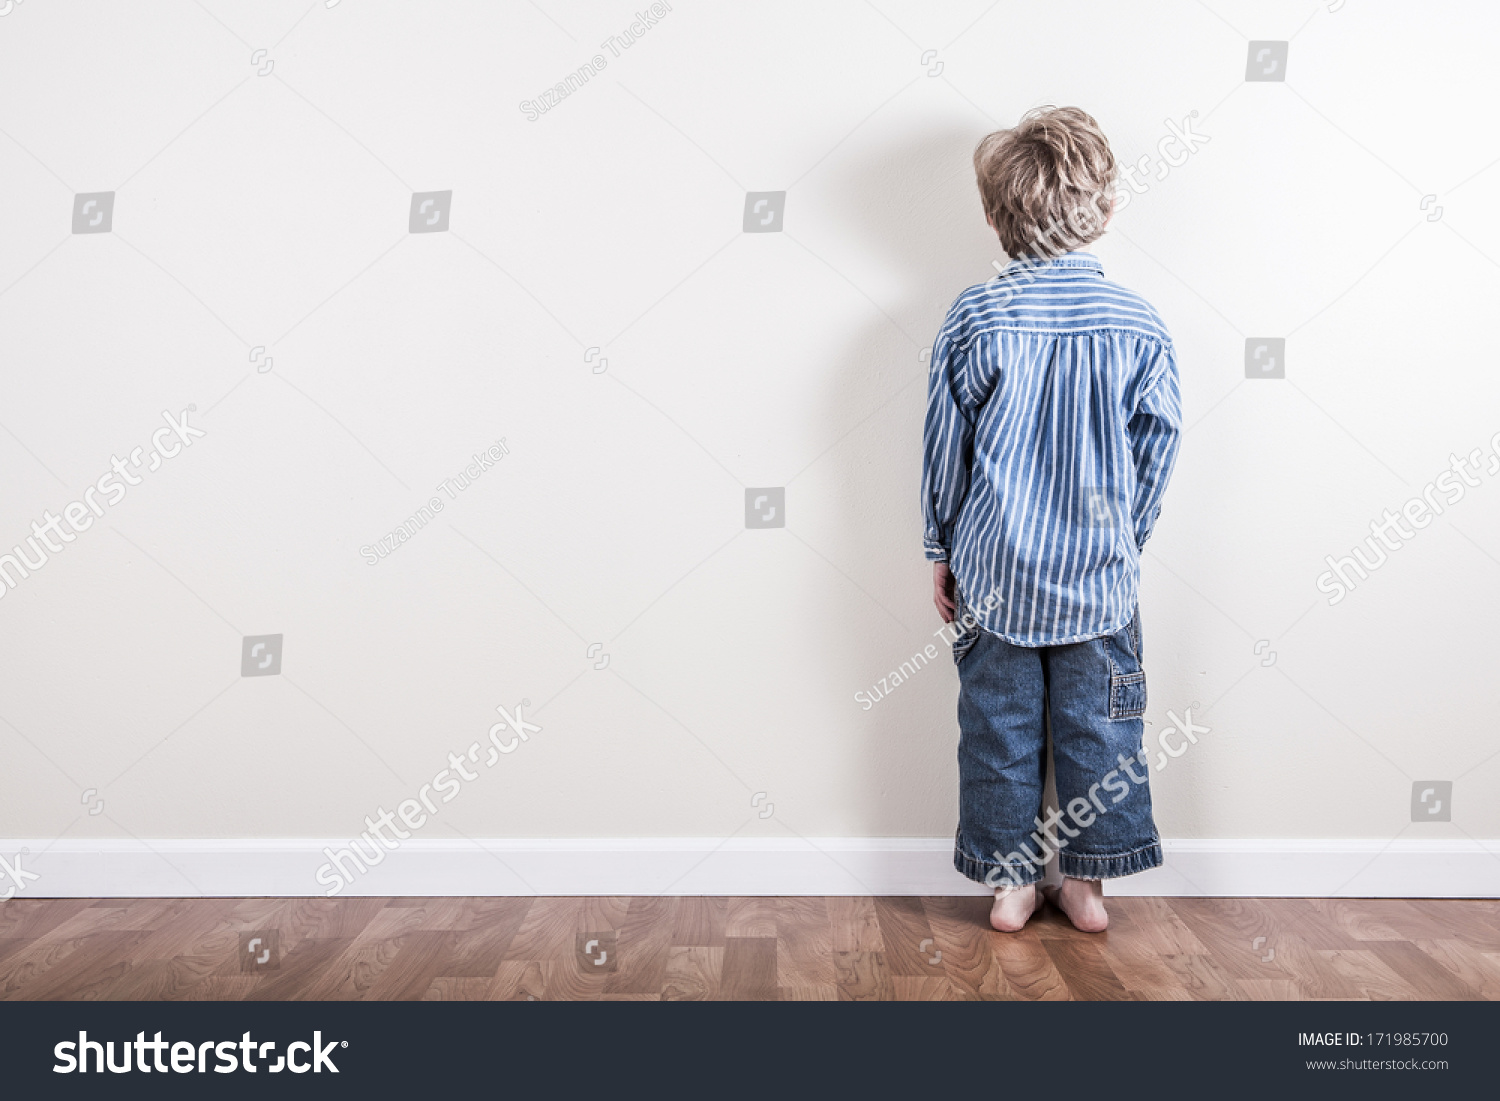 Boy standing up against a wall #171985700